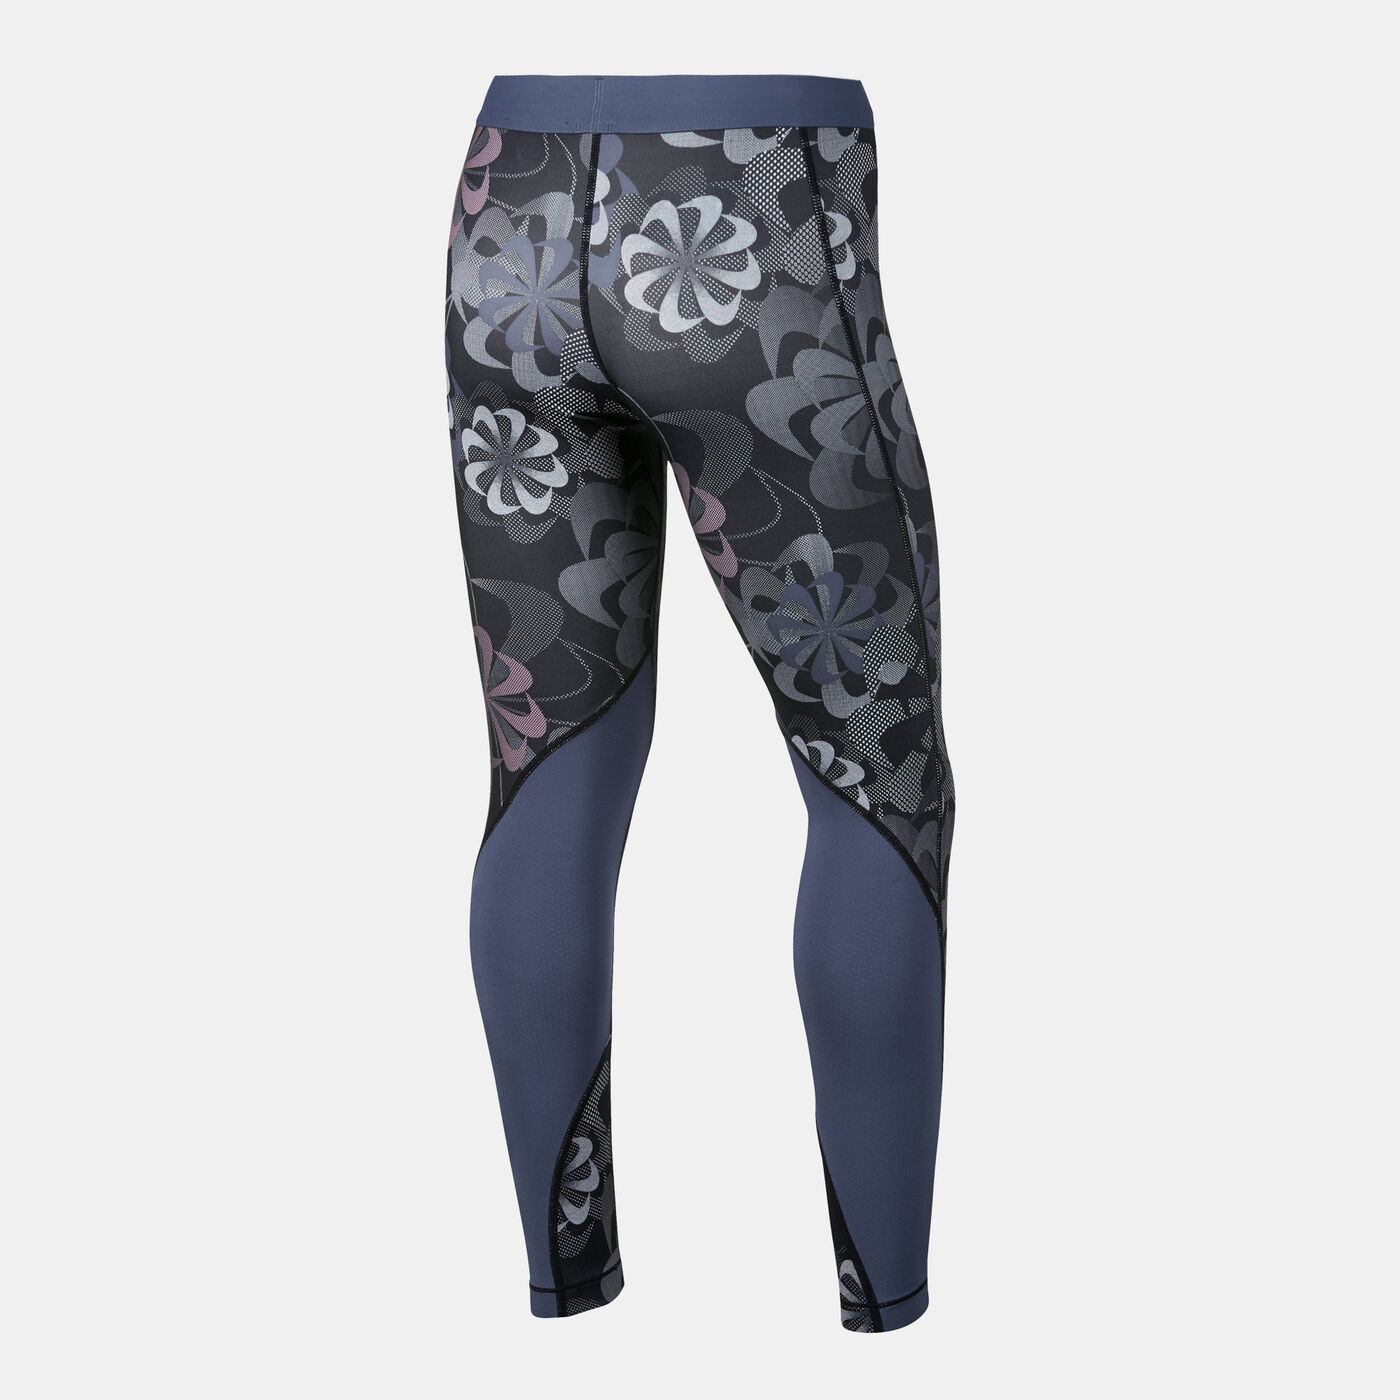 Kids' Pro Tight All Over Printed Tights